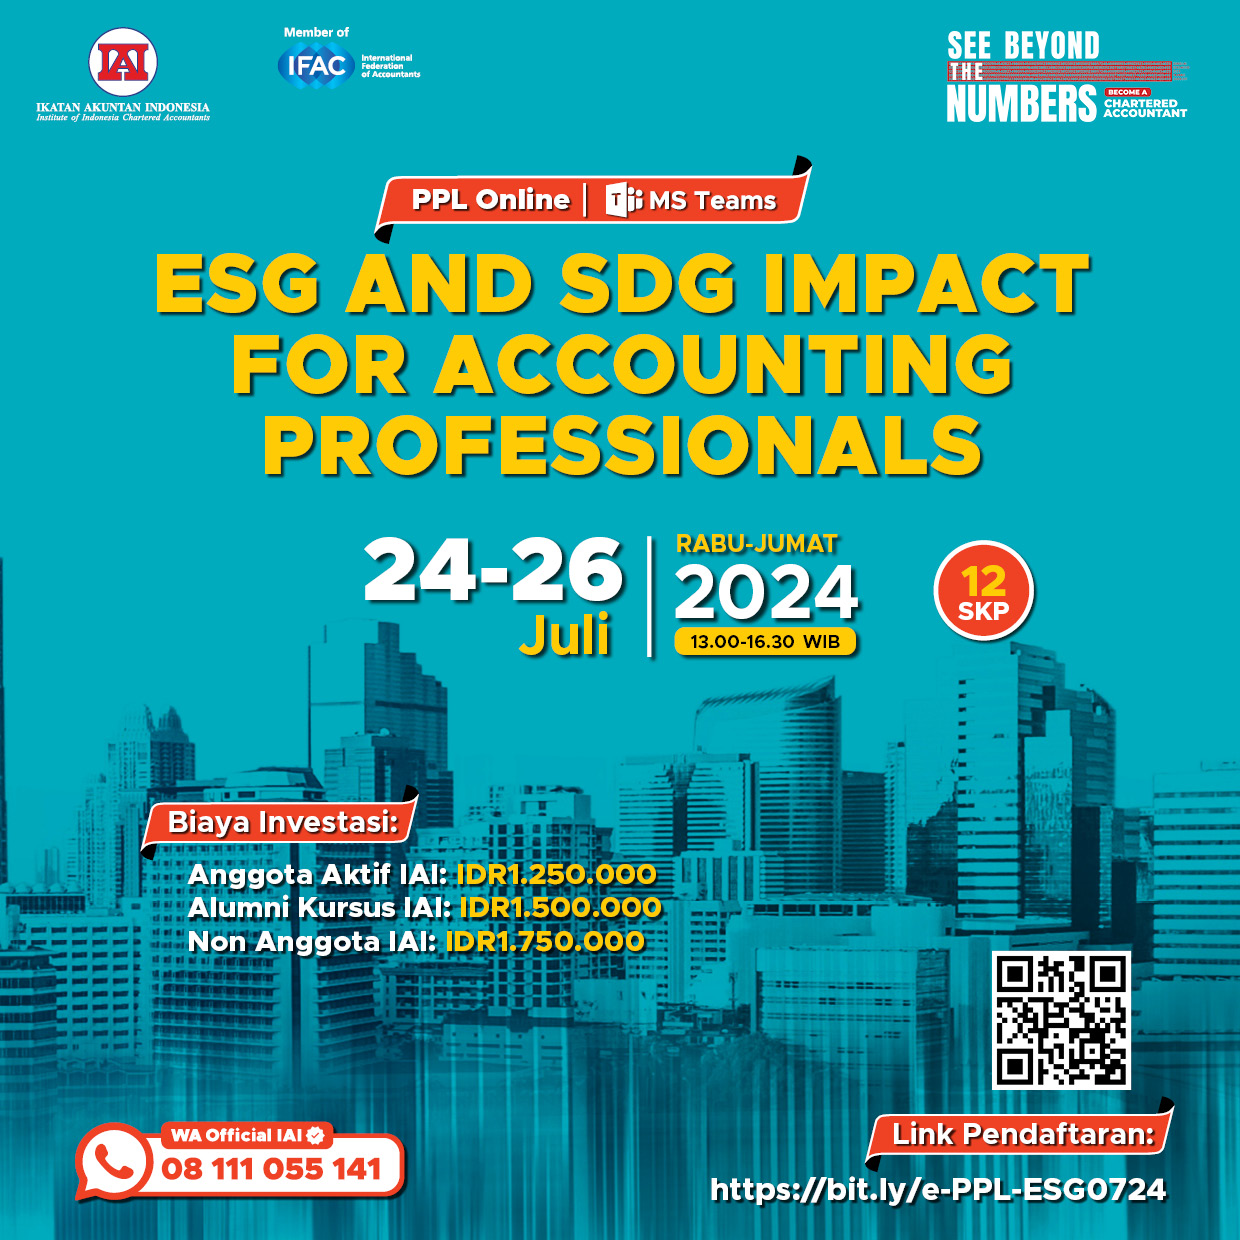 ESG and SDG Impact for Accounting Professionals